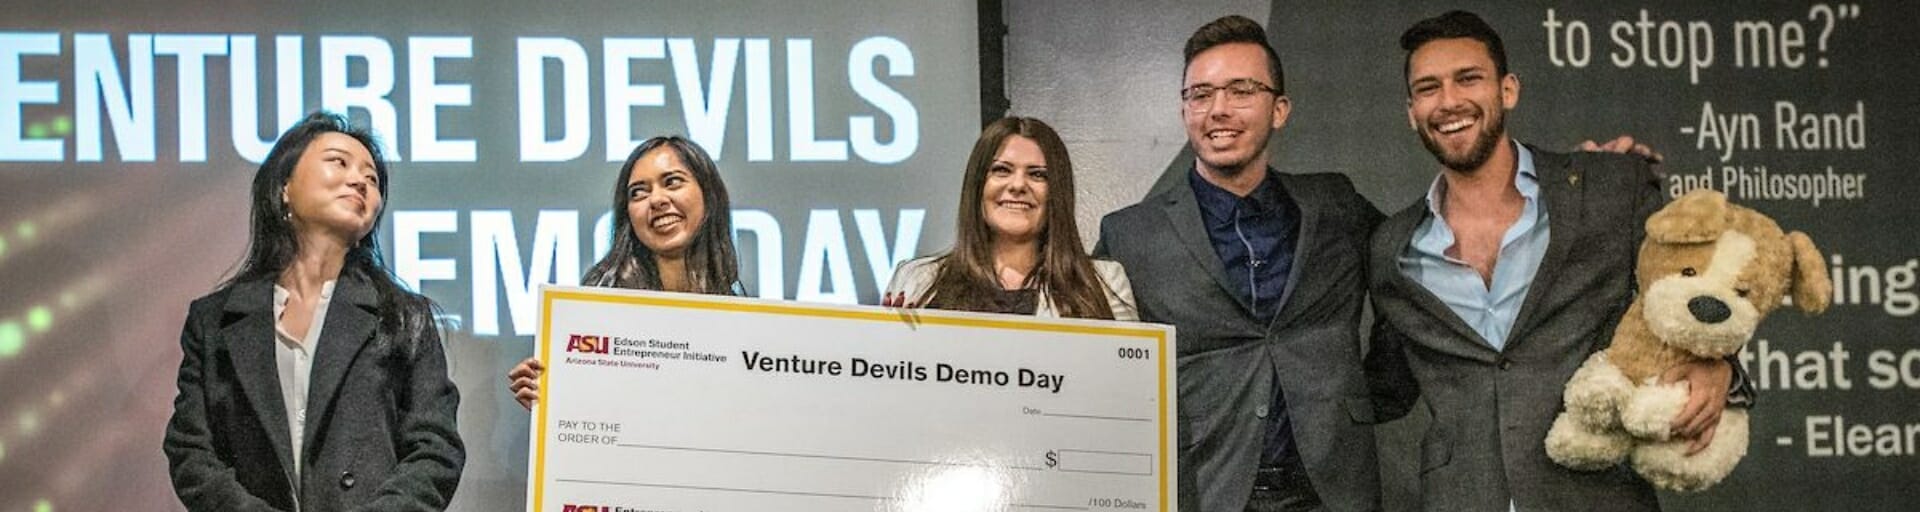 
		Five people smiling and standing on a stage in dress clothes holding a large Arizona State University Venture Devils Demo Day check with a ‘Venture Devils’ sign in the background.		